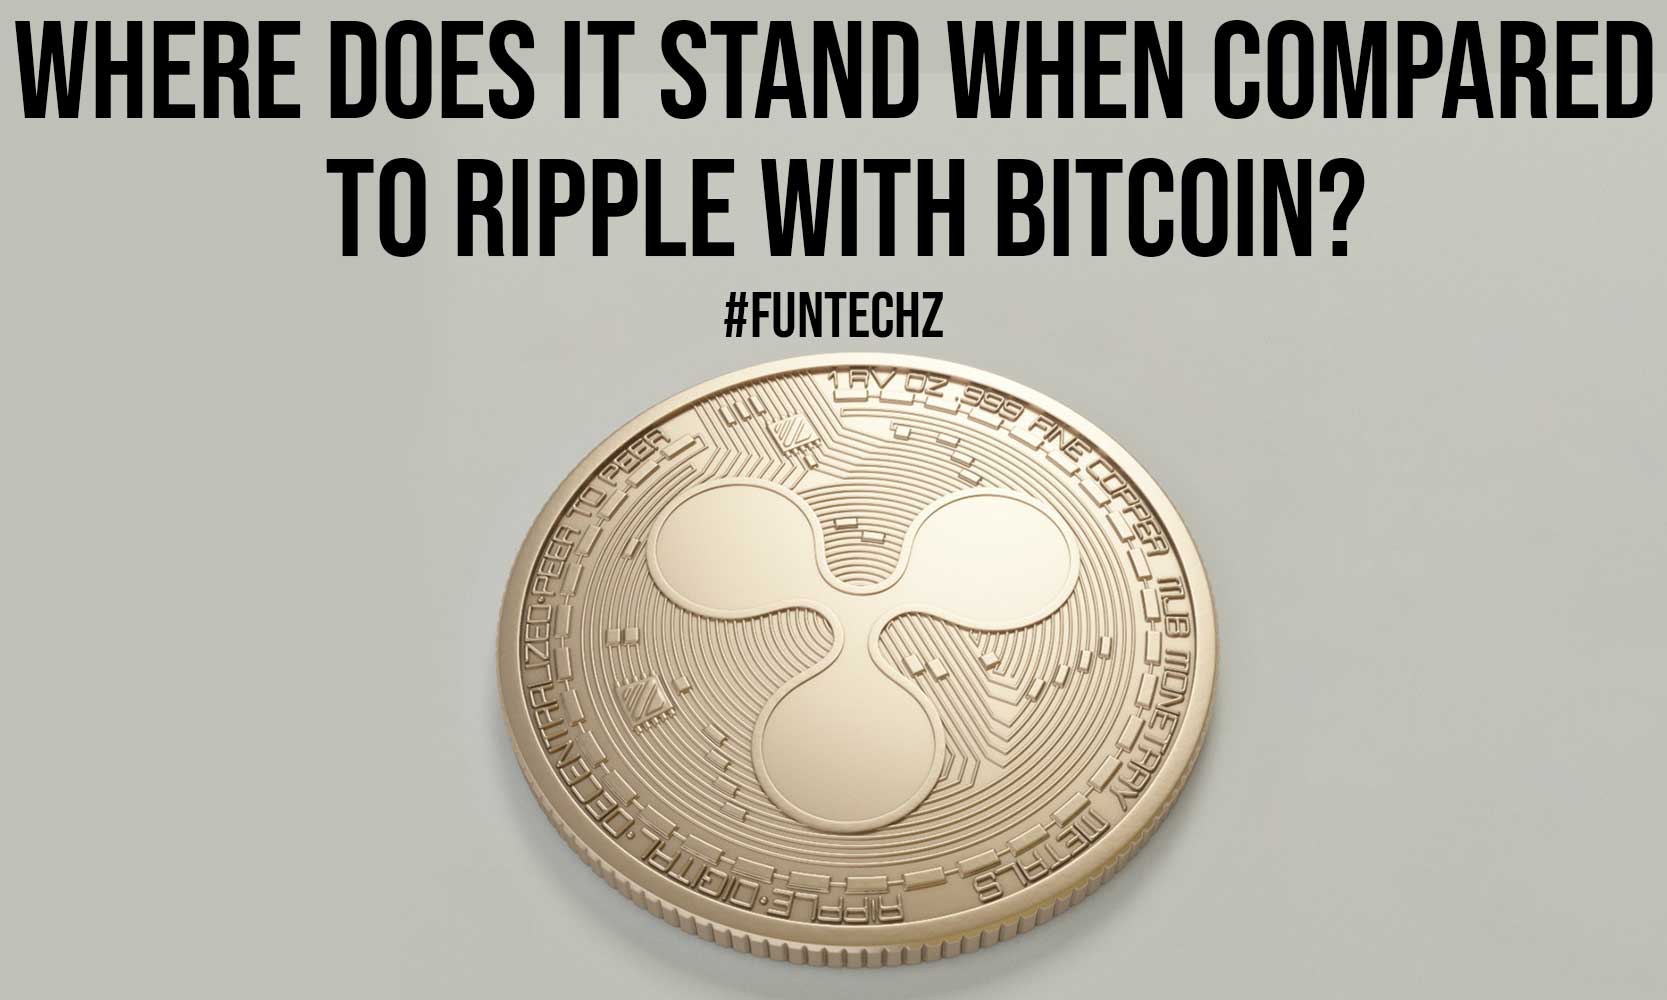 Where Does it Stand When Compared to Ripple with Bitcoin